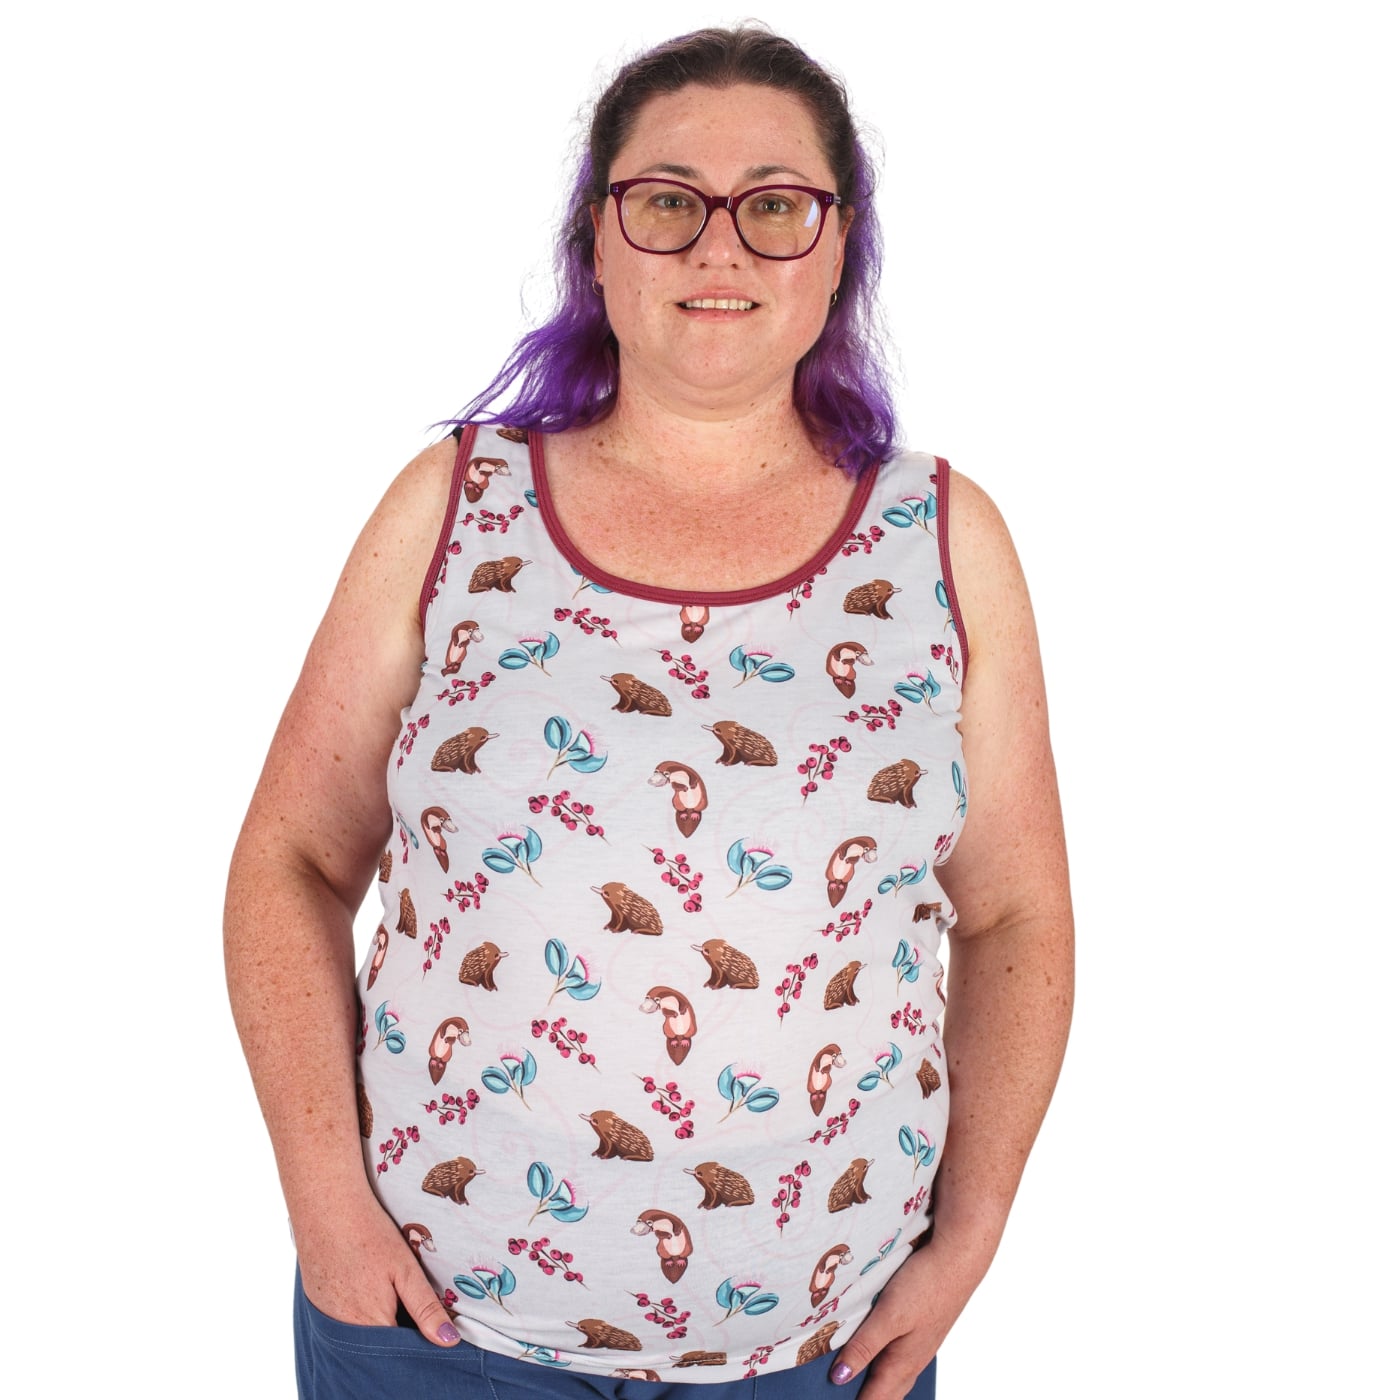 Puggle Singlet Top by RainbowsAndFairies.com (Playtpus - Echidna - Australian - Tank Top - Knit Top - Vintage Inspired) - SKU: CL_SGLET_PUGGL_ORG - Pic 04